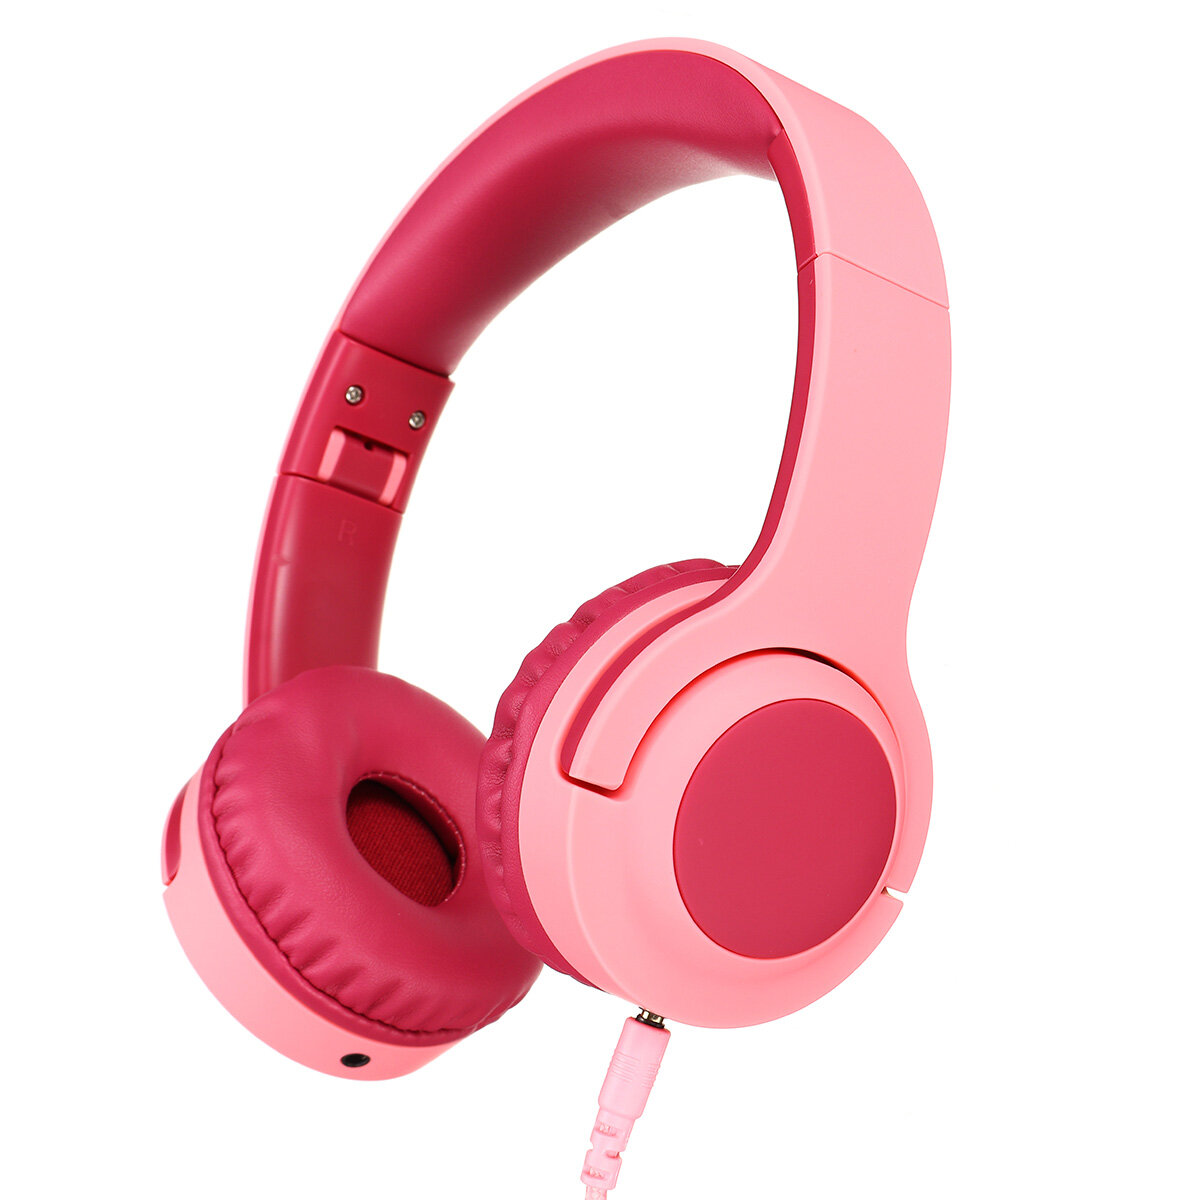 

Q2 Kids Headphone Wired On Ear Foldable Children Headset with Volume Limiting and Sharing Function 3.5mm Jack for School